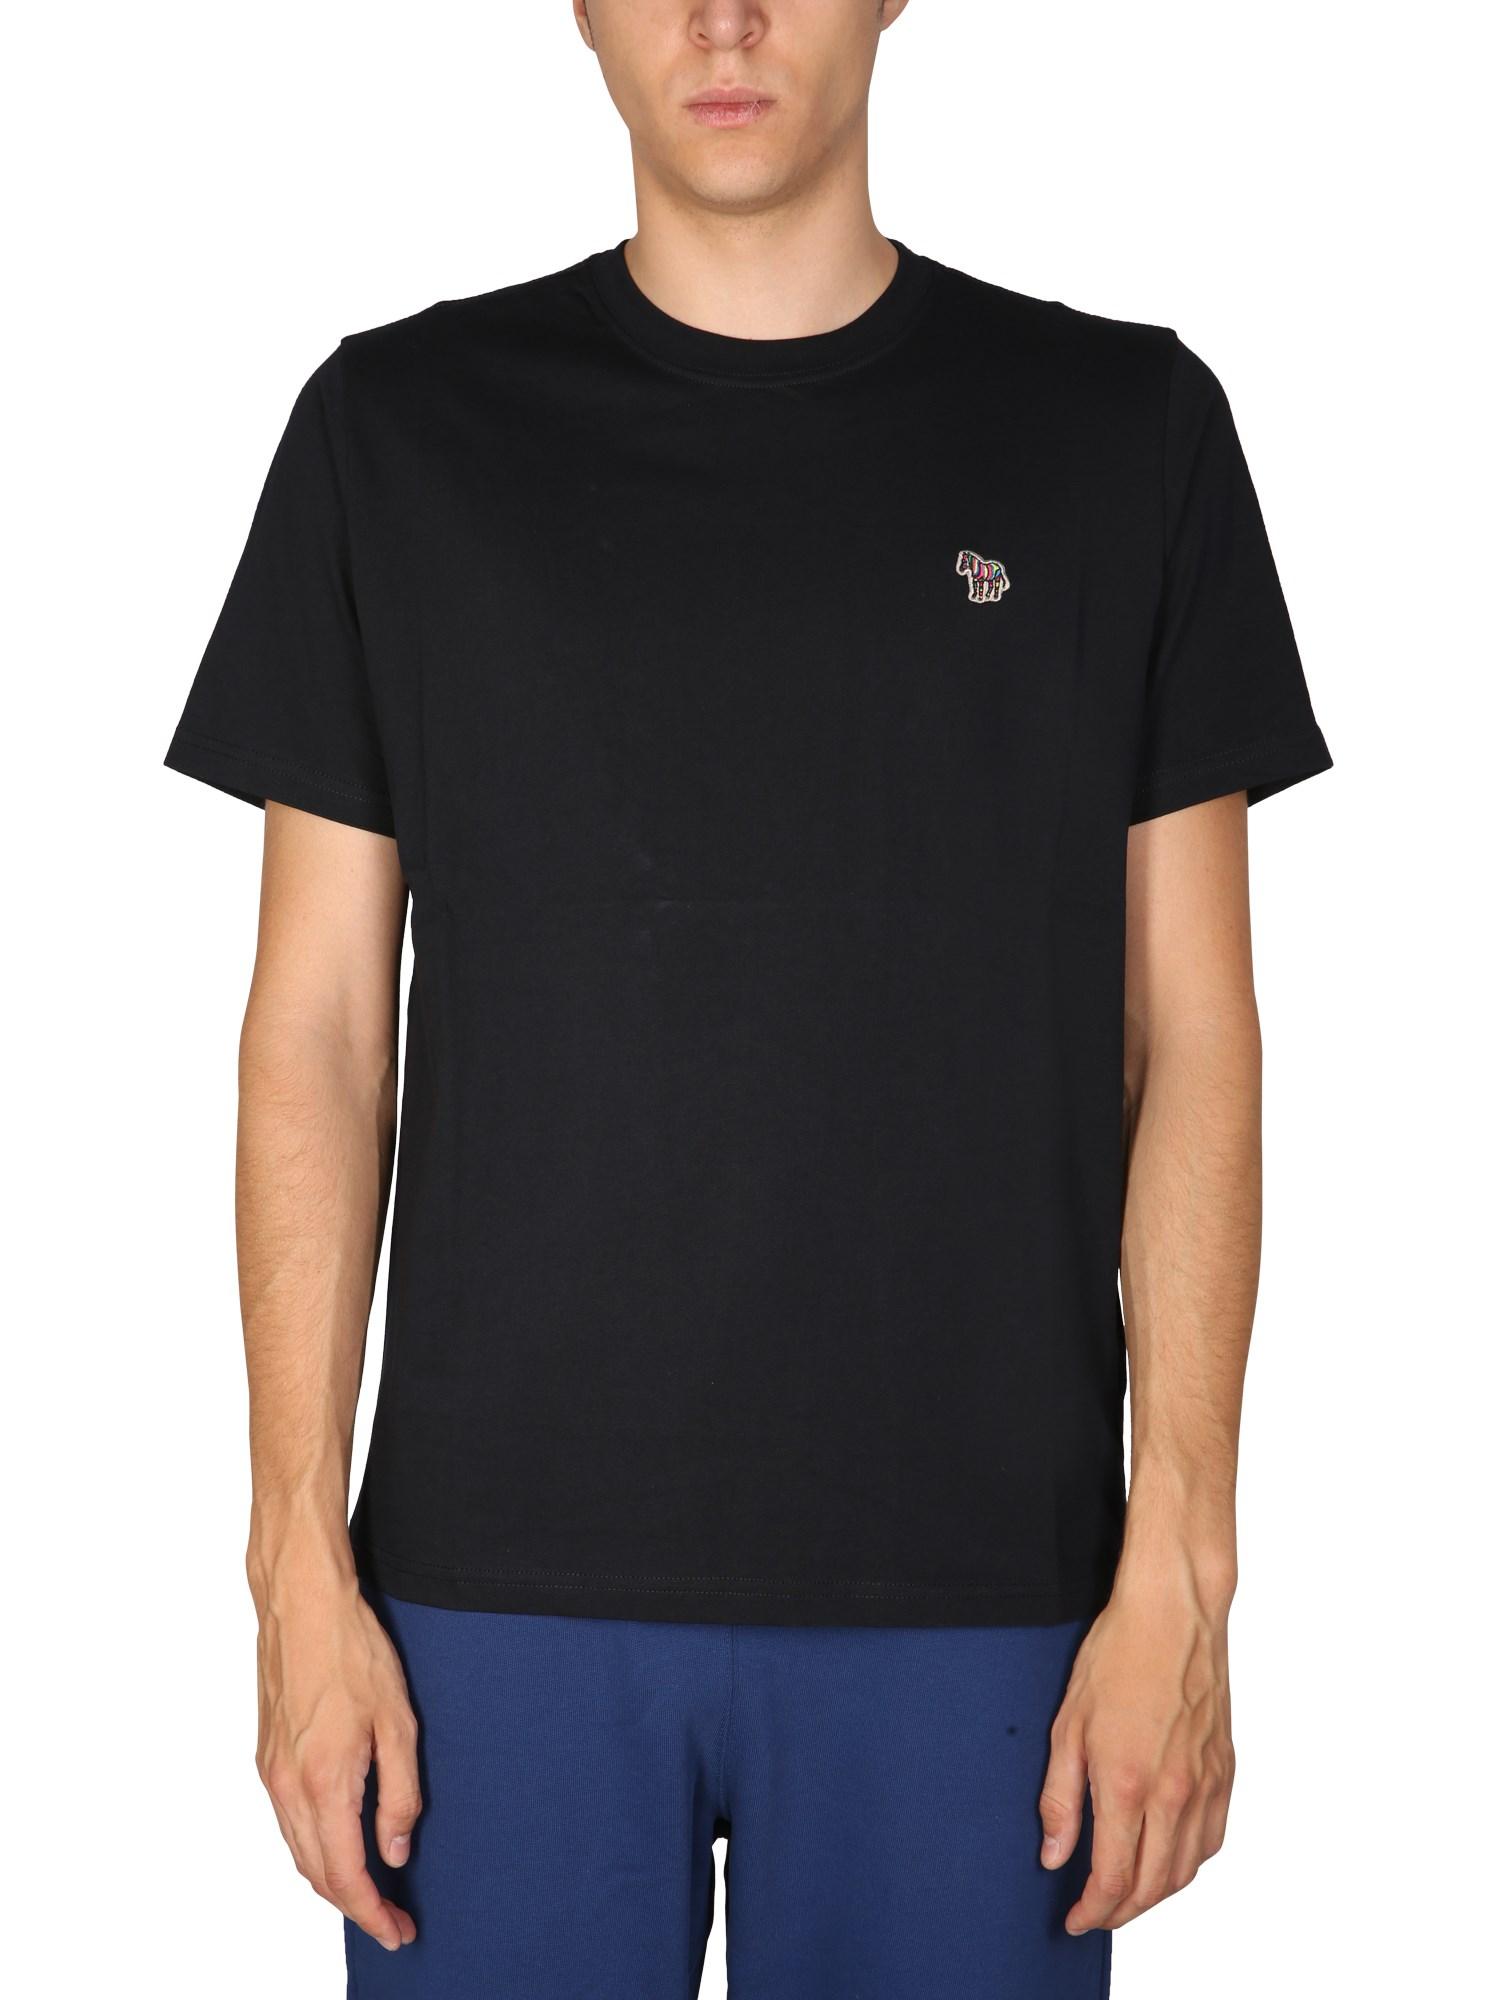 PS by Paul Smith Cotton Jersey "zebra" T-shirt in Black for Men | Lyst